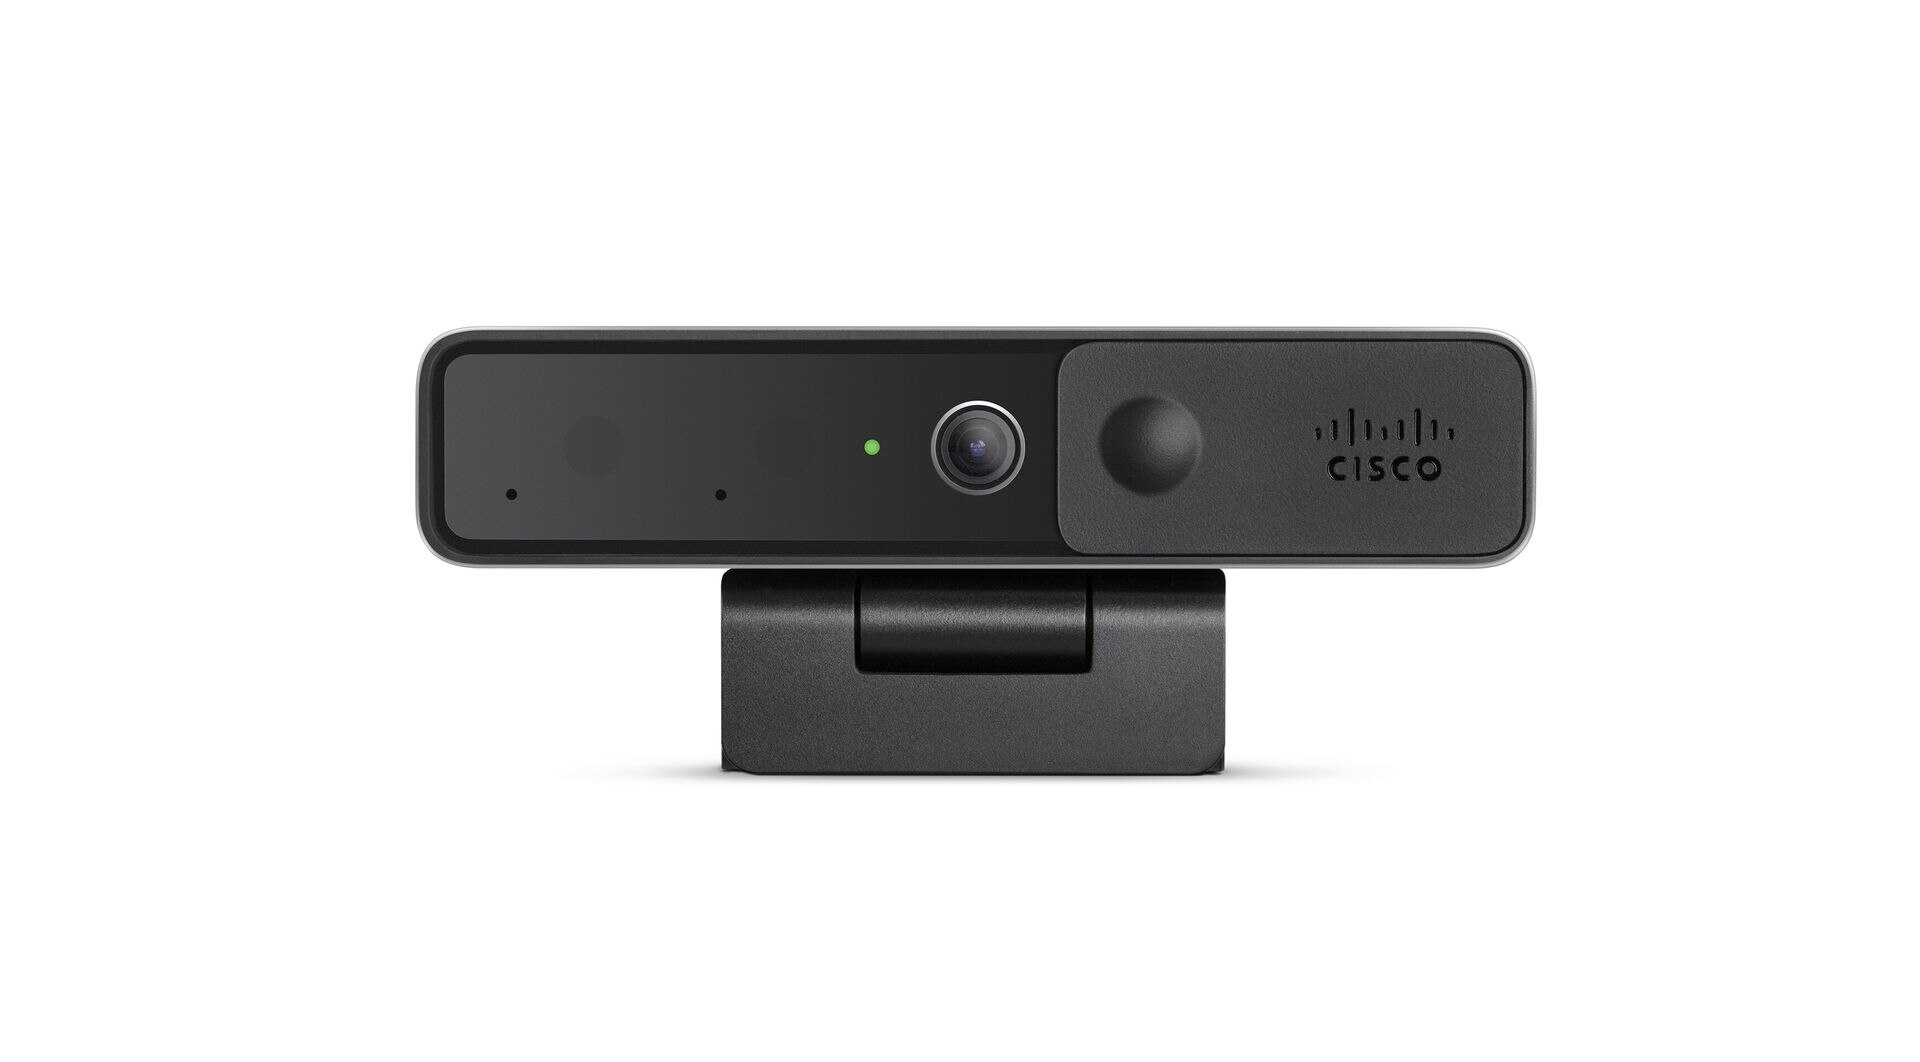 Front view of the Cisco Desk Camera.